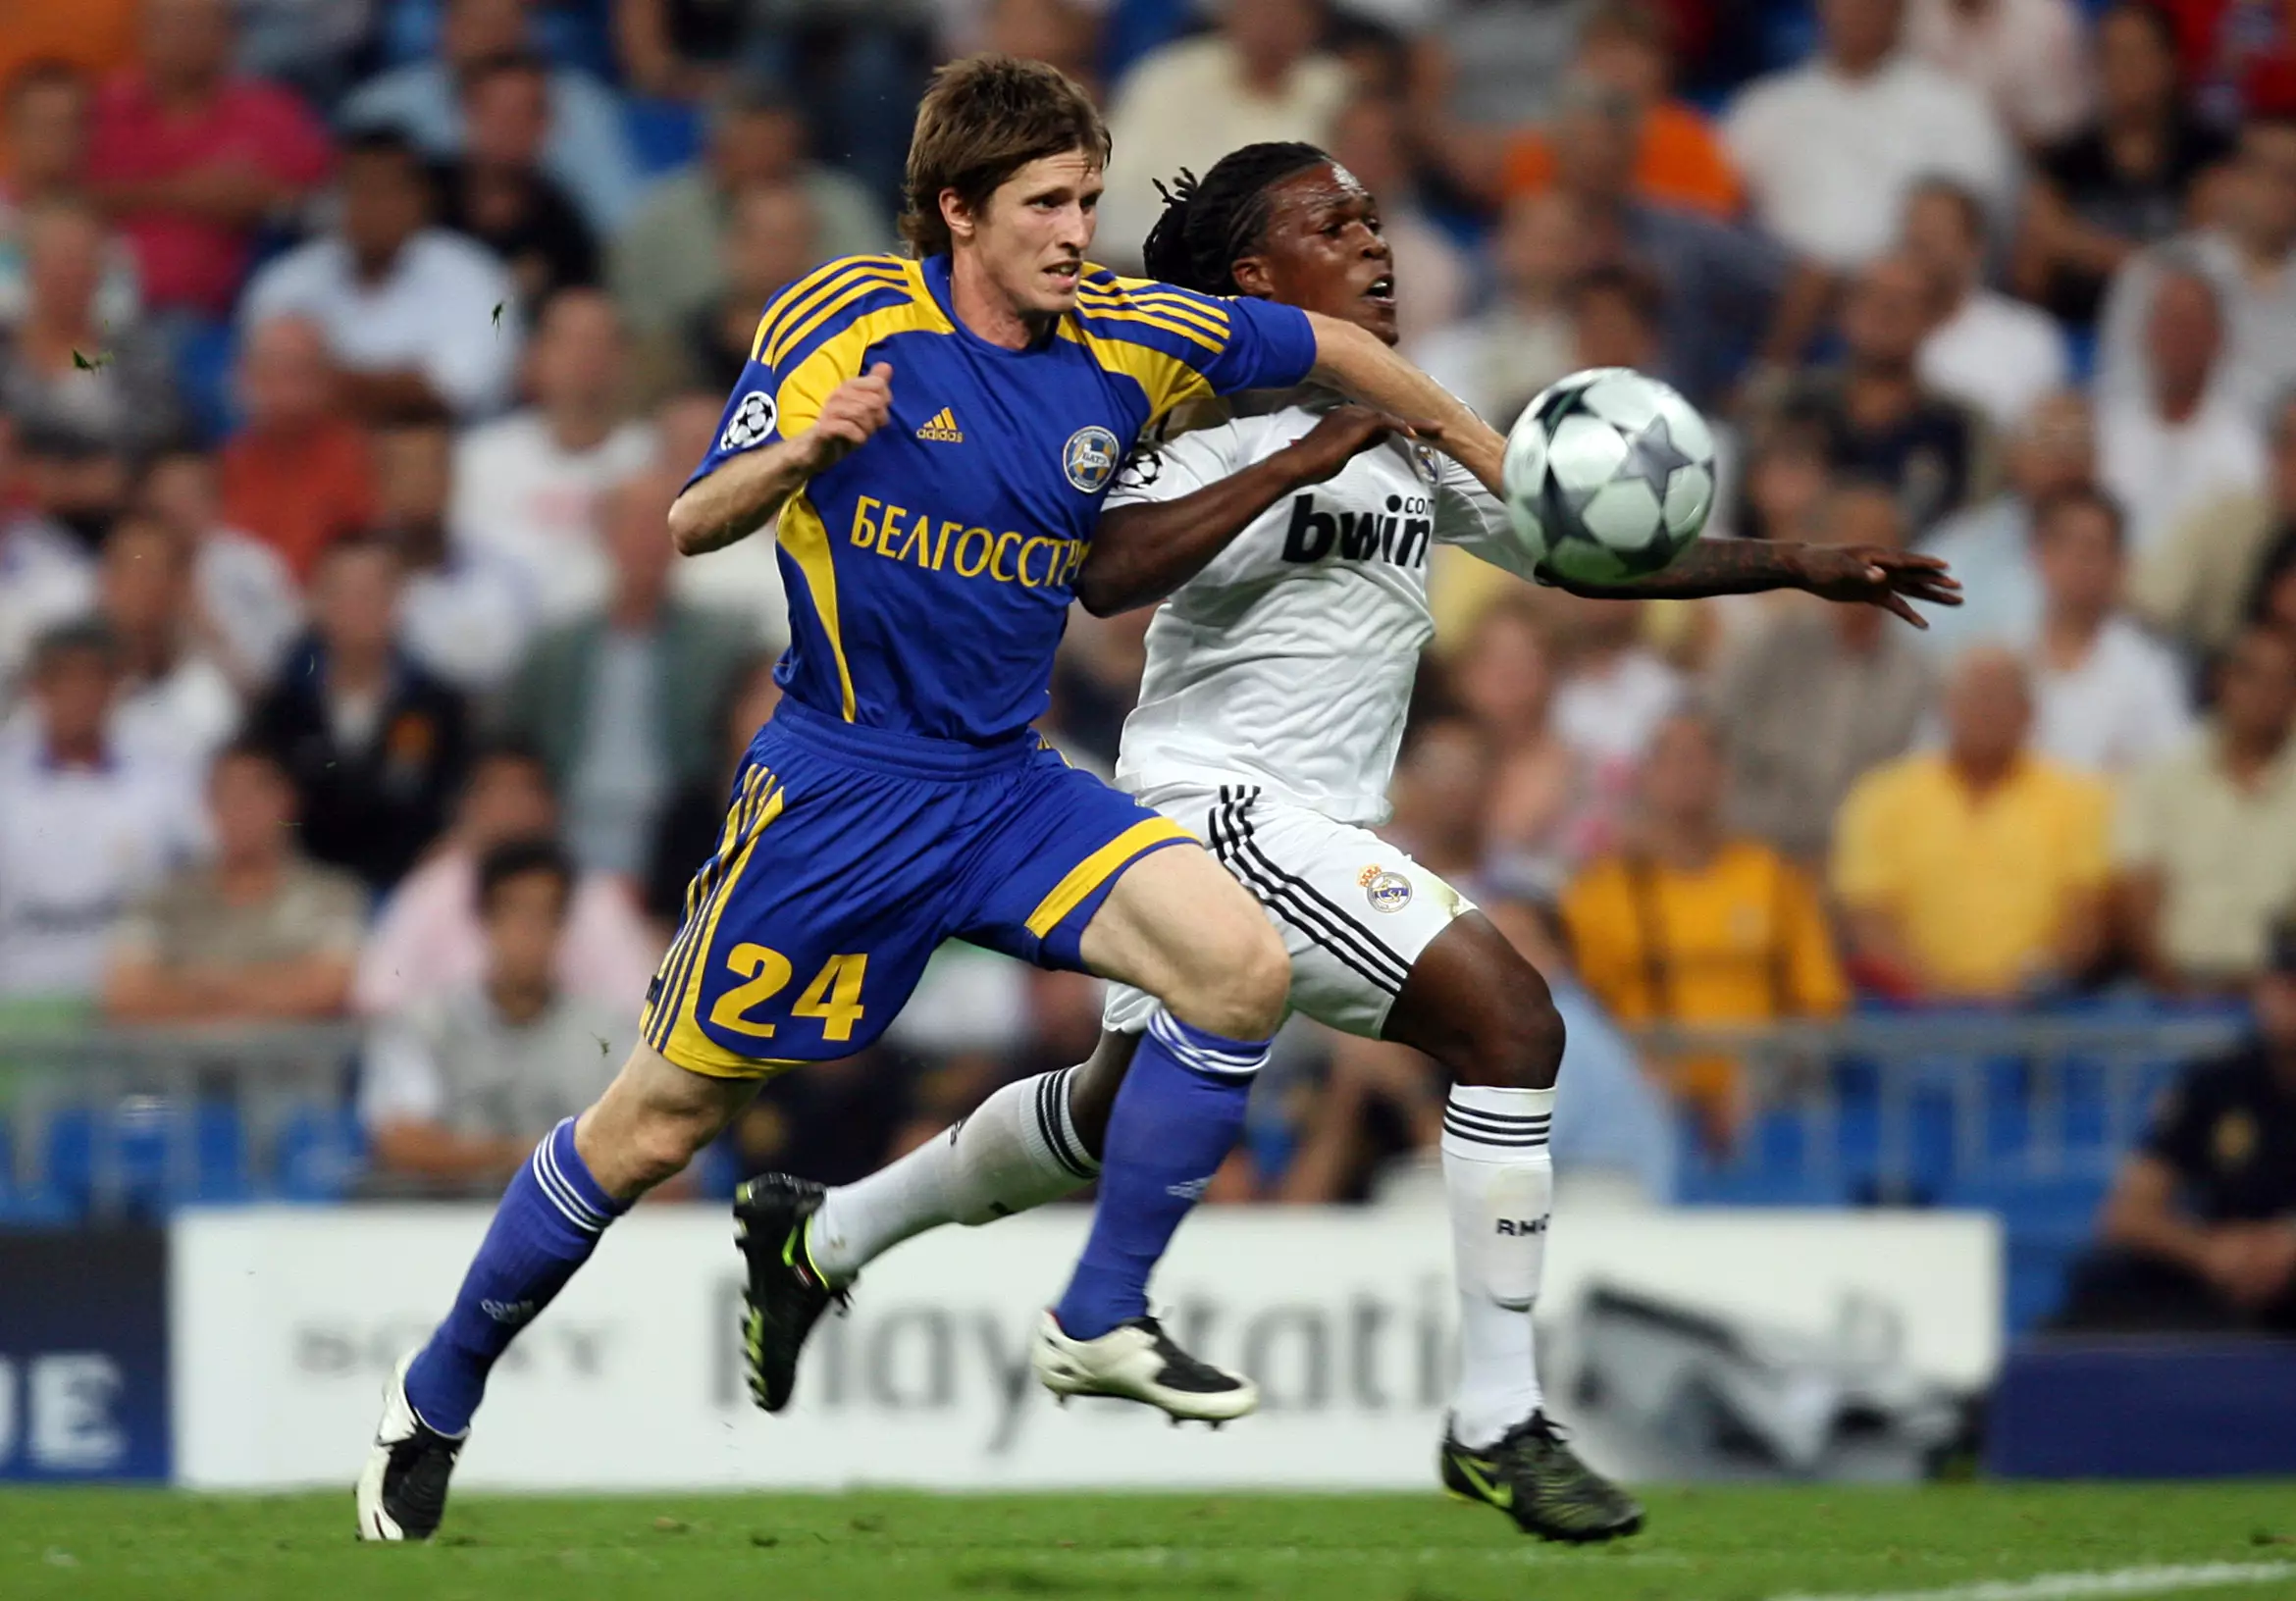 Royston Drenthe (right) representing Real Madrid in the Champions League. (Image